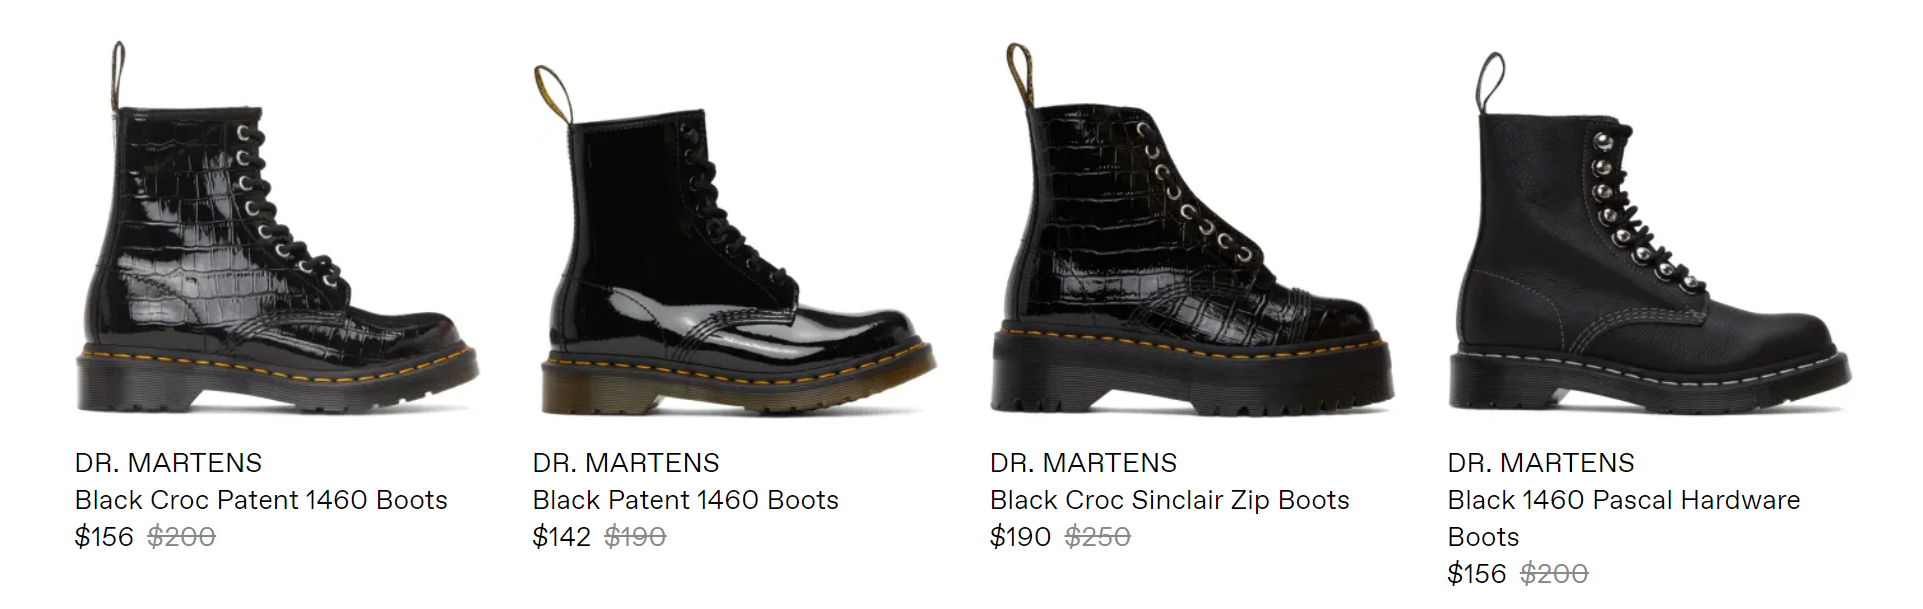 dr-martens-martin-boots-55-fold-up-122-classic-2020-12-12